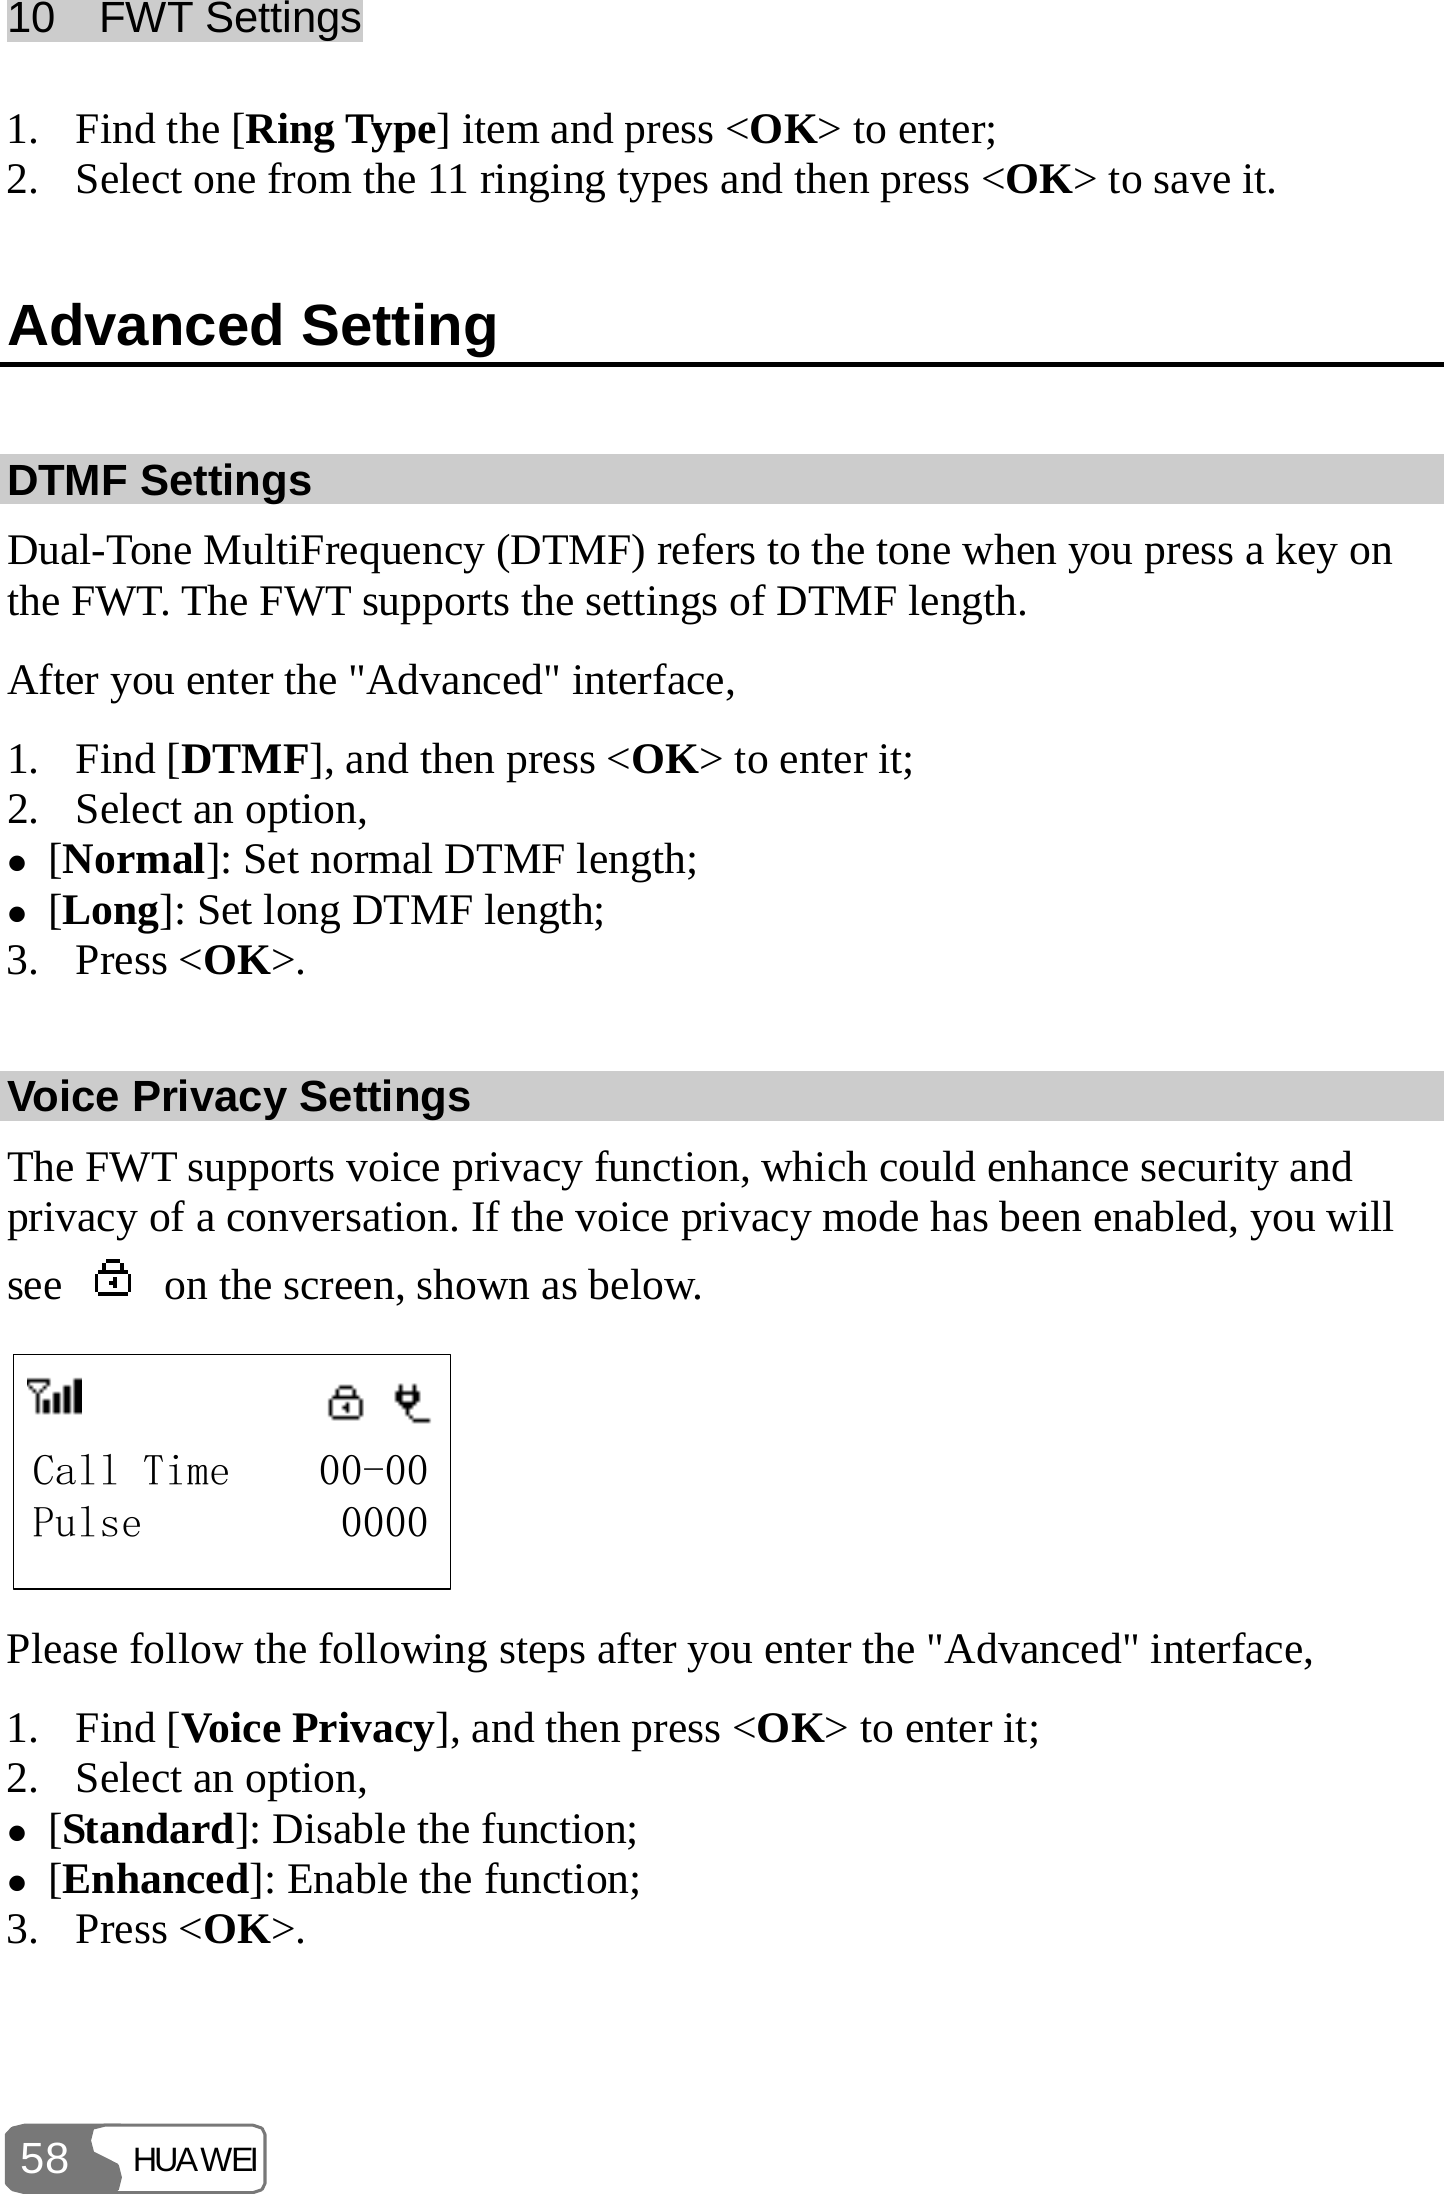 10  FWT Settings HUAWEI 58 1. Find the [Ring Type] item and press &lt;OK&gt; to enter; 2. Select one from the 11 ringing types and then press &lt;OK&gt; to save it. Advanced Setting DTMF Settings Dual-Tone MultiFrequency (DTMF) refers to the tone when you press a key on the FWT. The FWT supports the settings of DTMF length. After you enter the &quot;Advanced&quot; interface, 1. Find [DTMF], and then press &lt;OK&gt; to enter it; 2. Select an option, z [Normal]: Set normal DTMF length; z [Long]: Set long DTMF length; 3. Press &lt;OK&gt;. Voice Privacy Settings The FWT supports voice privacy function, which could enhance security and privacy of a conversation. If the voice privacy mode has been enabled, you will see    on the screen, shown as below. Call Time    00-00Pulse         0000 Please follow the following steps after you enter the &quot;Advanced&quot; interface, 1. Find [Voice Privacy], and then press &lt;OK&gt; to enter it; 2. Select an option, z [Standard]: Disable the function; z [Enhanced]: Enable the function; 3. Press &lt;OK&gt;. 